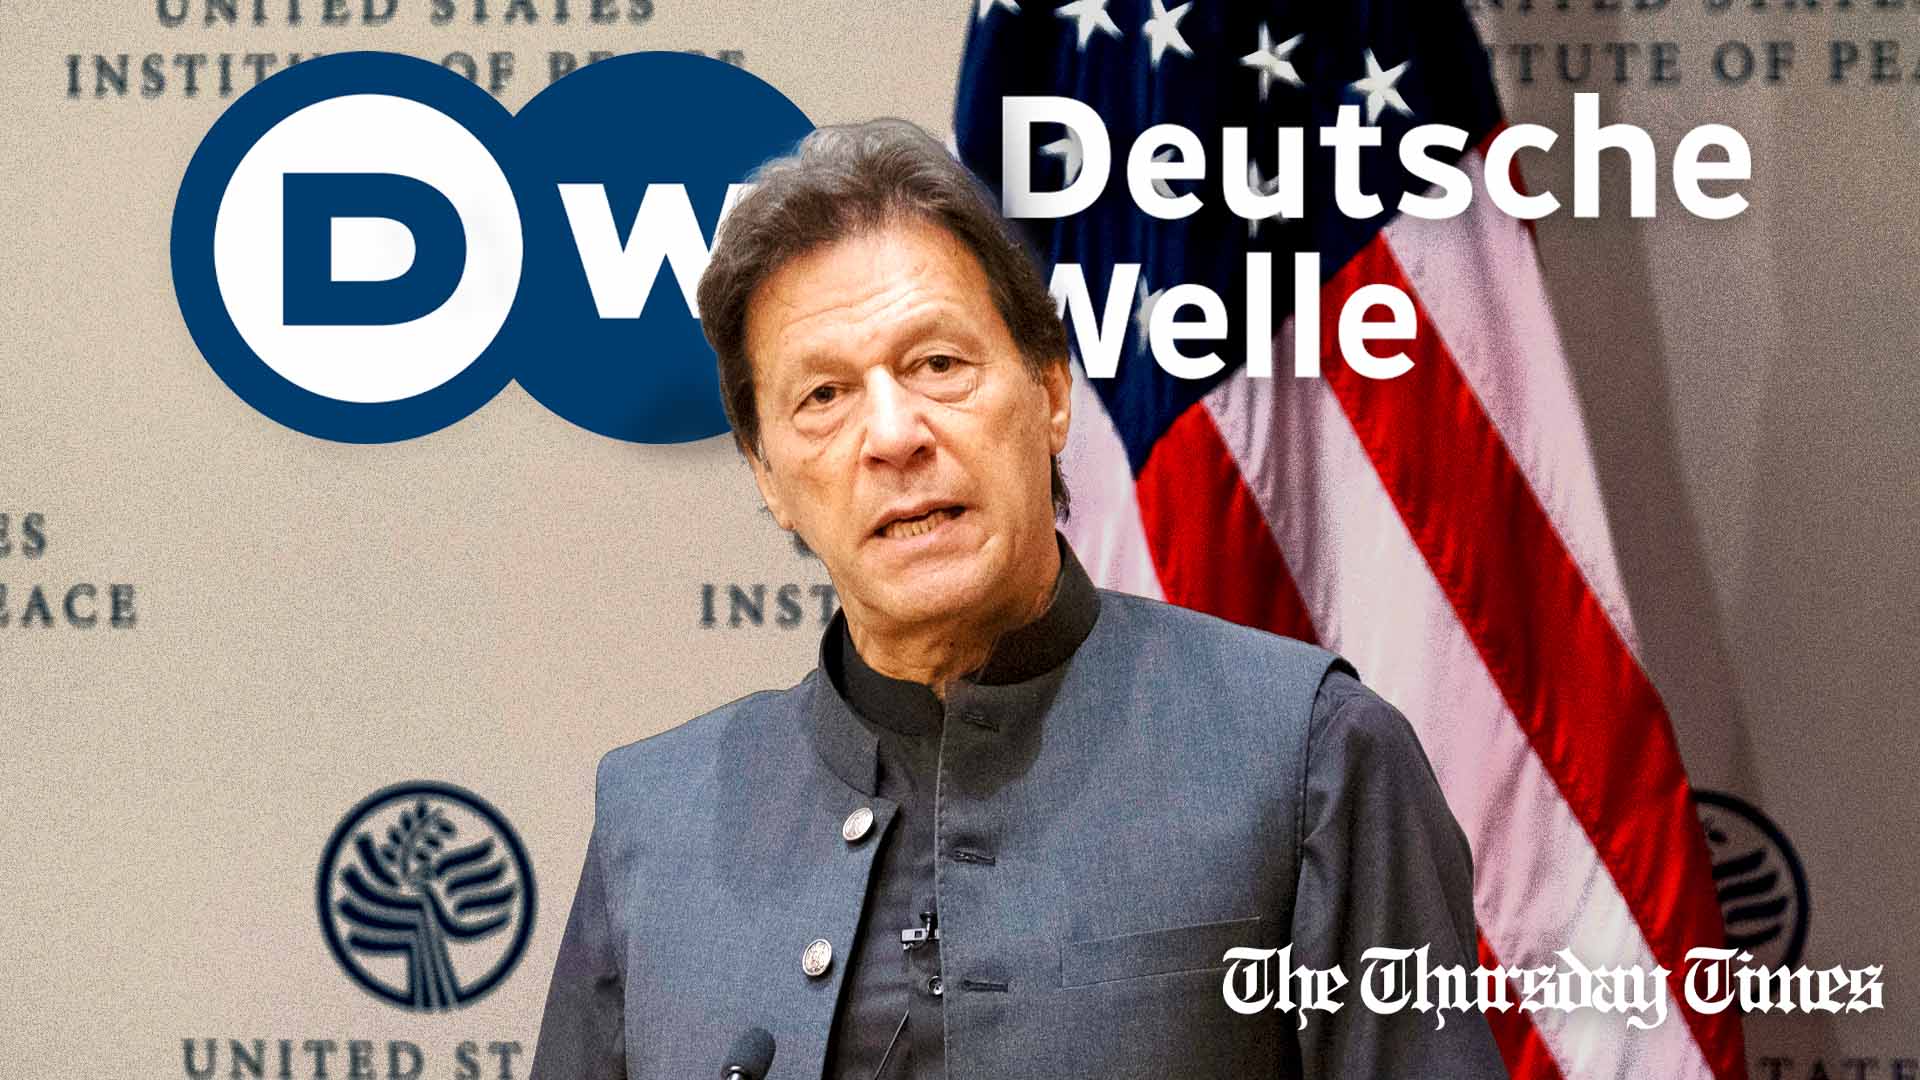 A file photo is shown of PTI president Imran Khan at Washington, D.C. in 2019. — FILE/THE THURSDAY TIMES